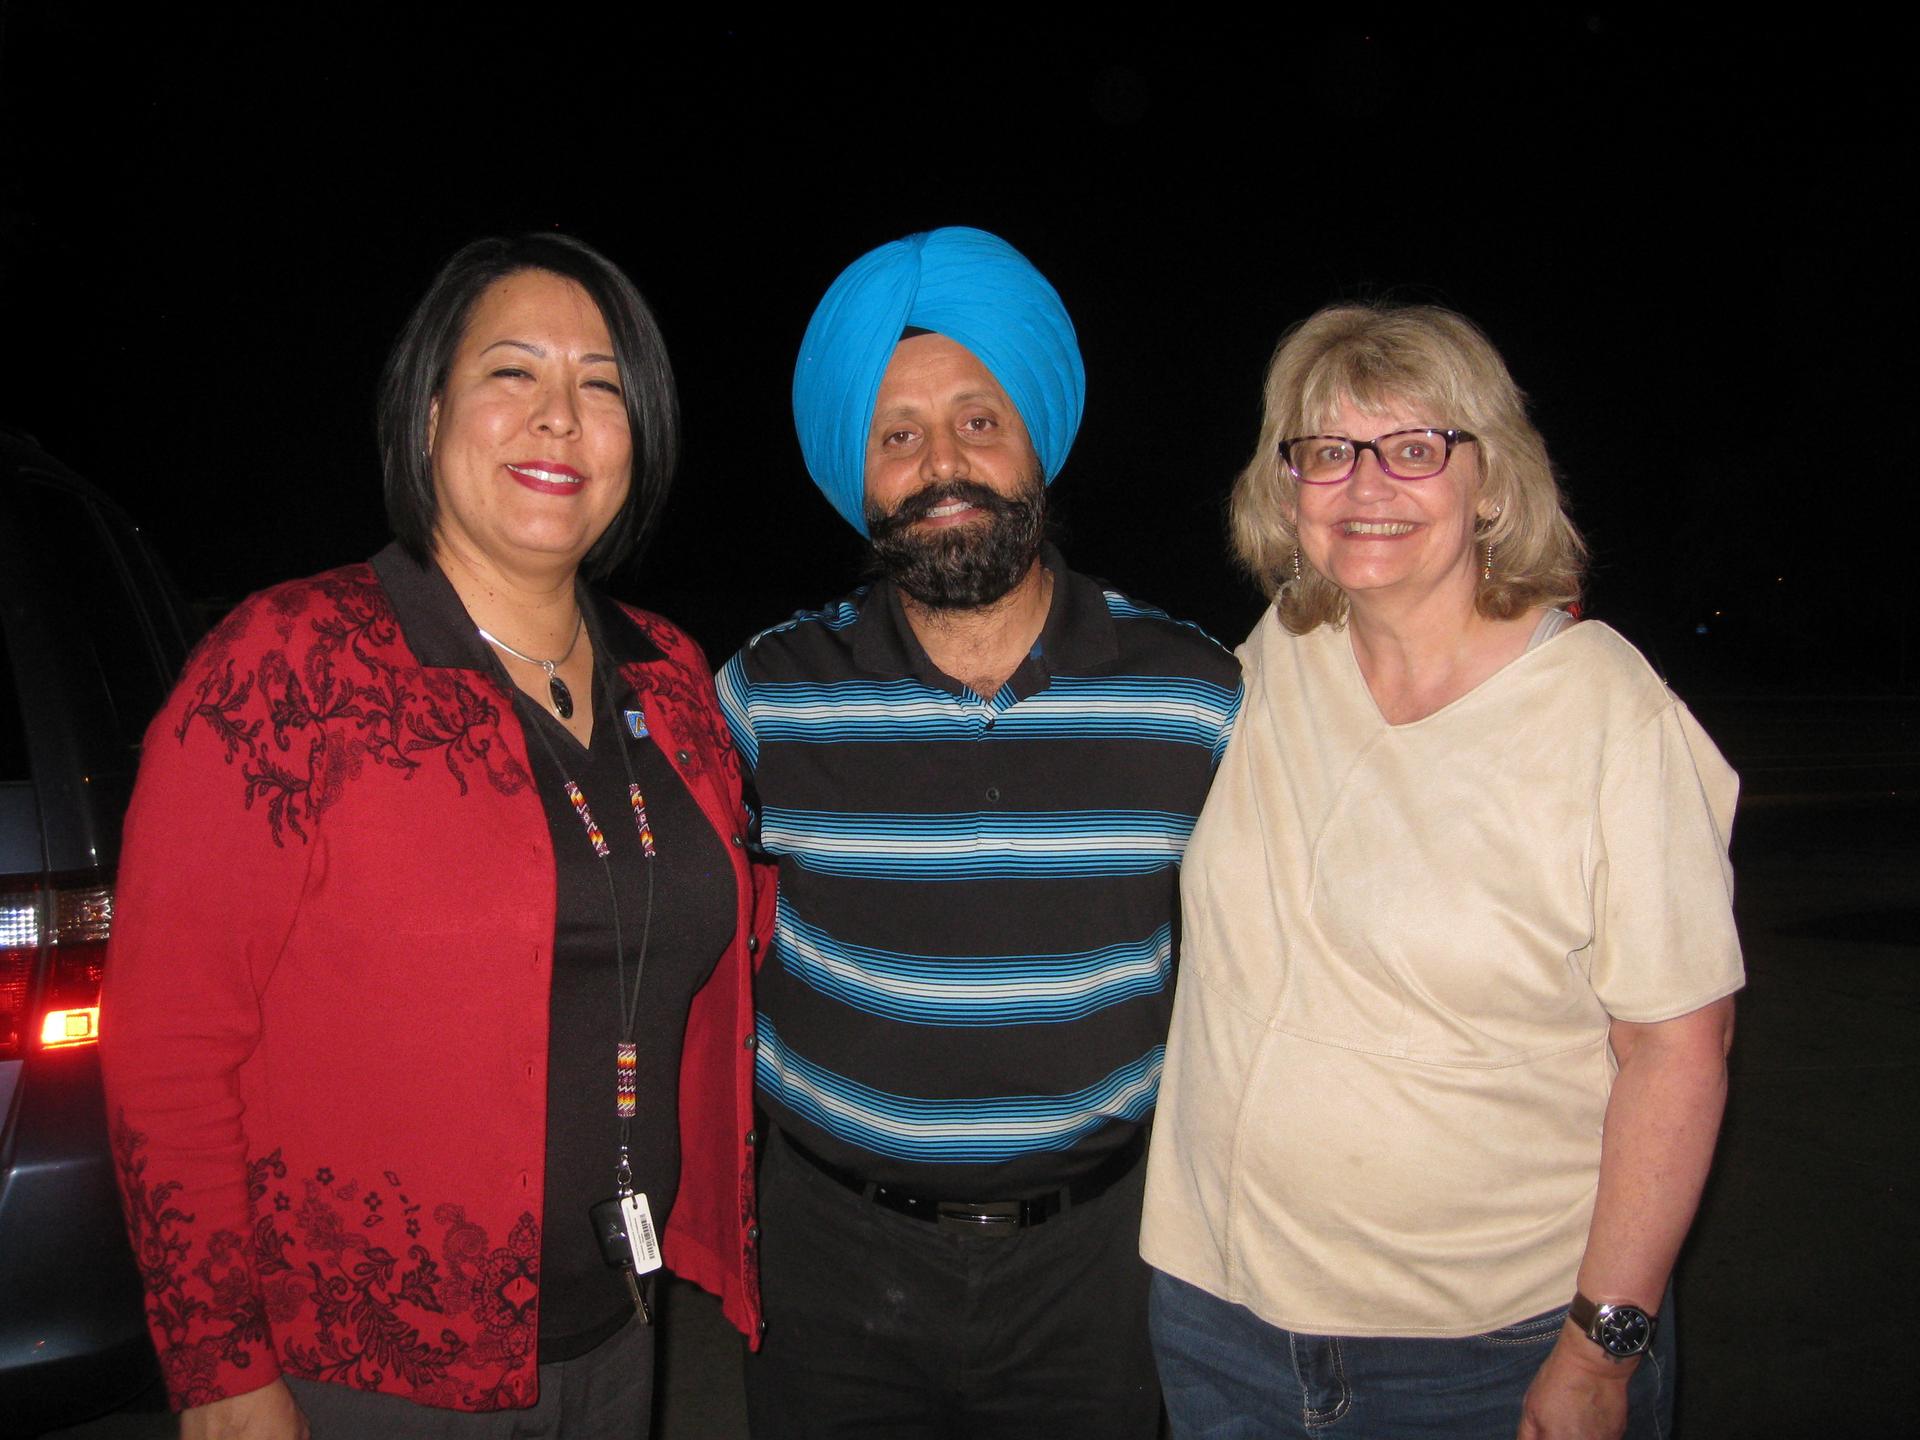 Rana Singh Sodhi (center) at a memorial service for his older brother, Balbir, 15 years after his murder in the days after 9/11.